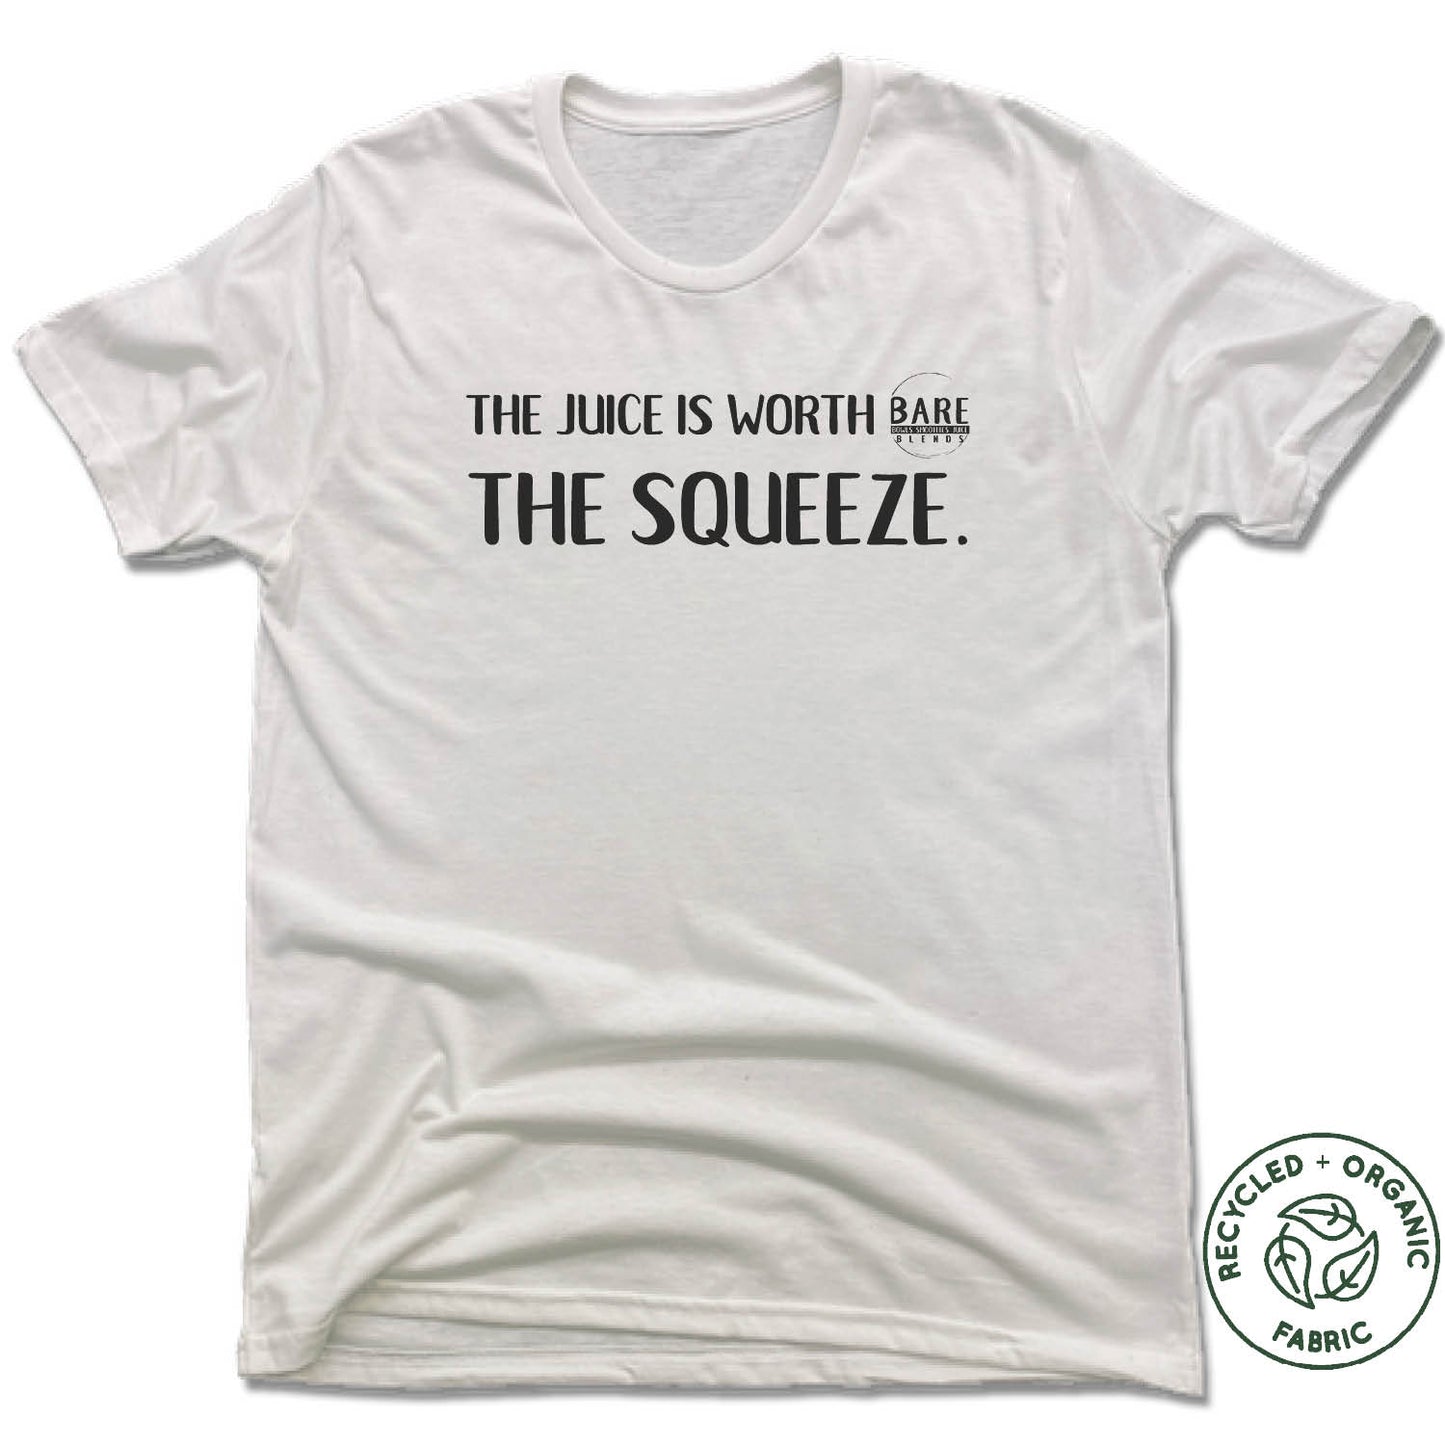 BARE BLENDS | UNISEX WHITE Recycled Tri-Blend | THE SQUEEZE BLACK LOGO